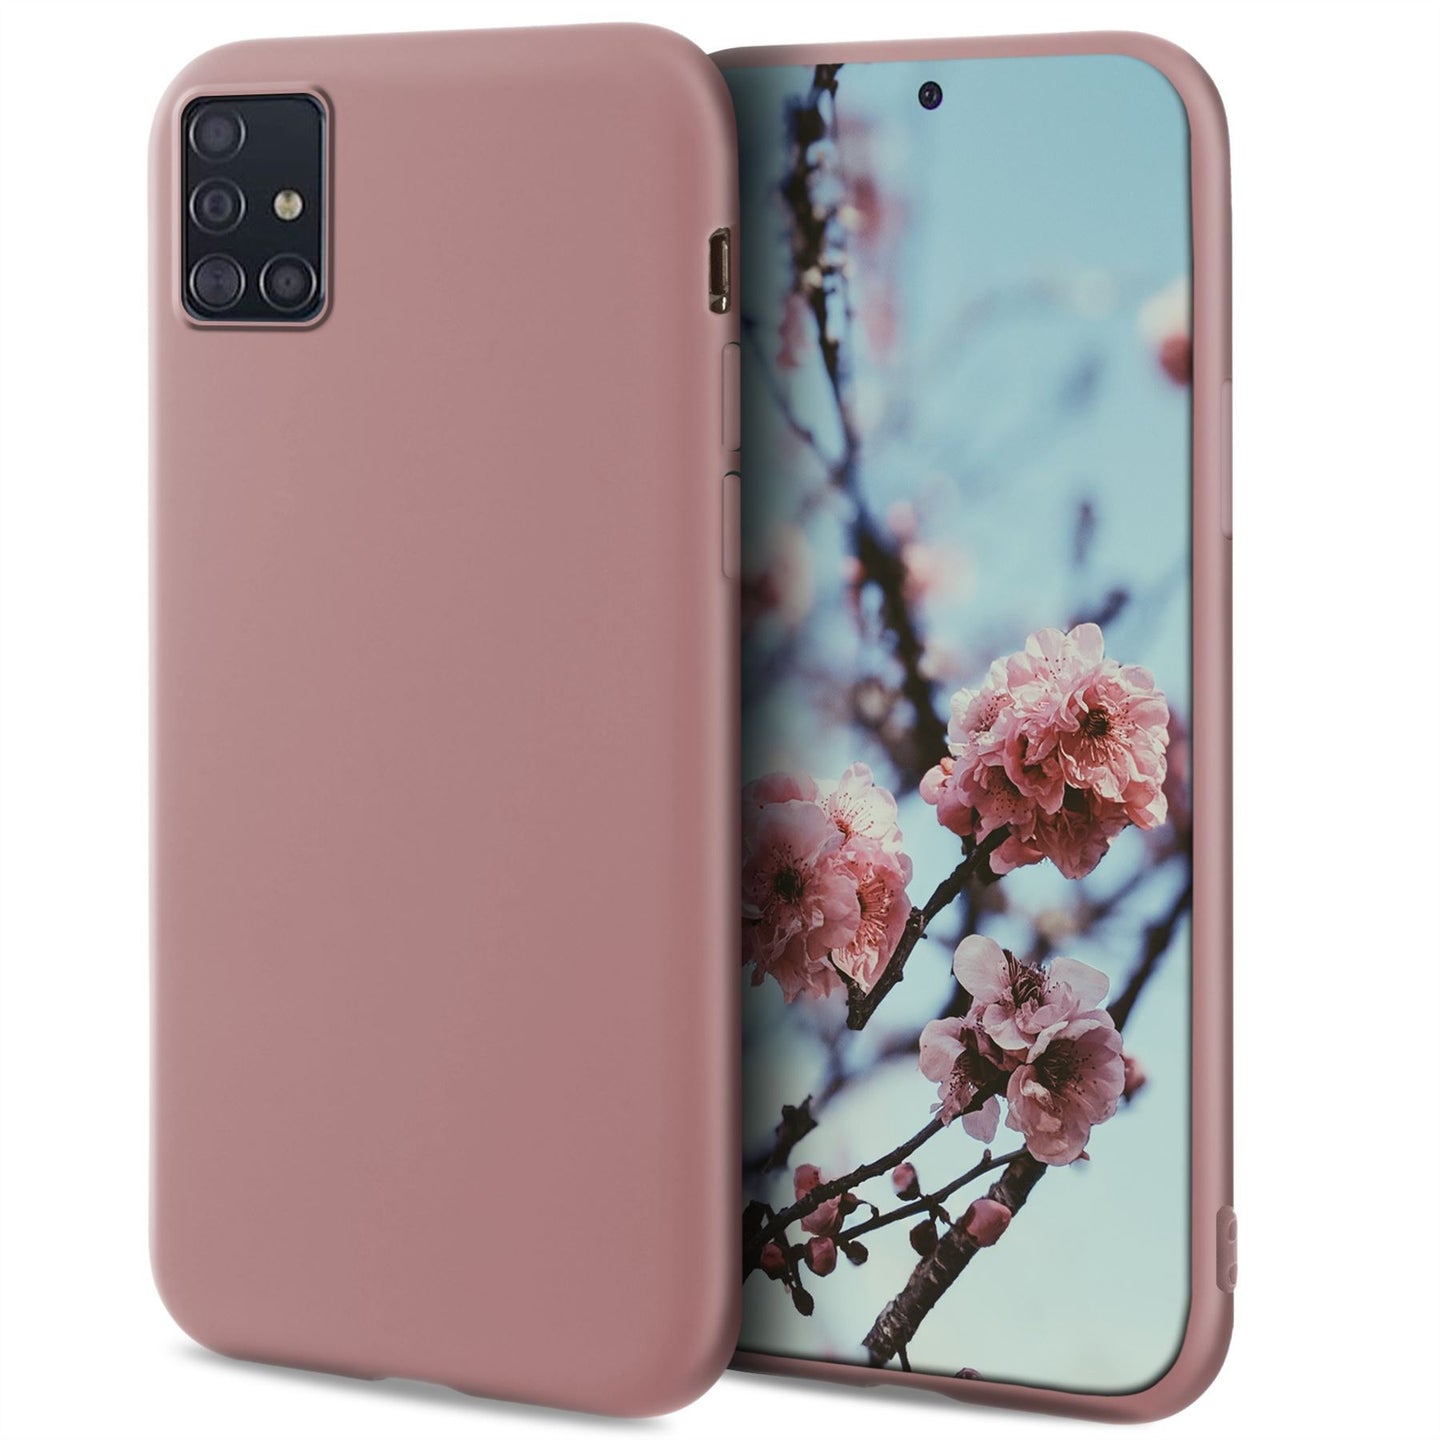 Moozy Minimalist Series Silicone Case for Samsung A71, Rose Beige - Matte Finish Slim Soft TPU Cover